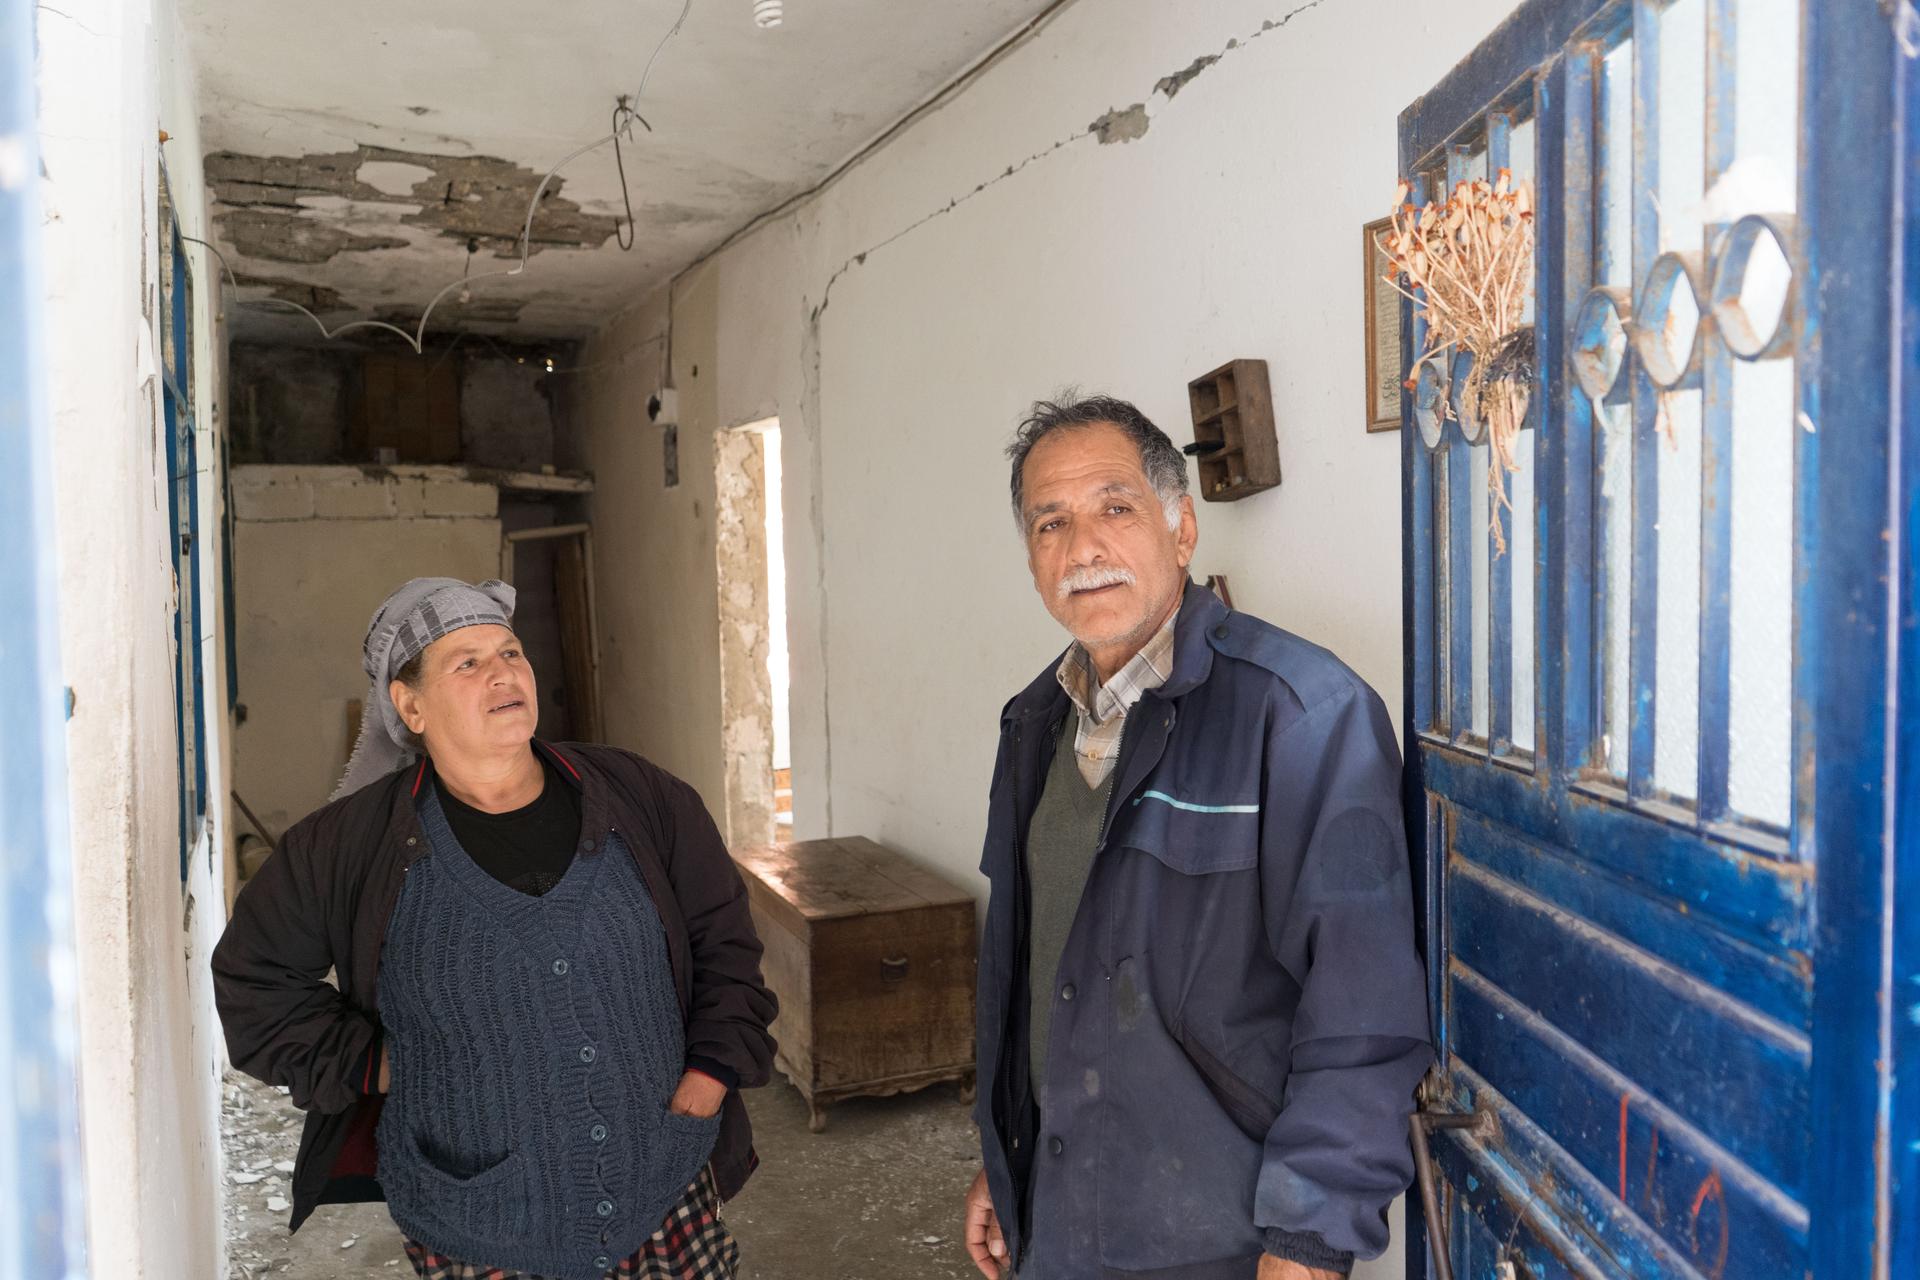 a man and woman inside a damaged house